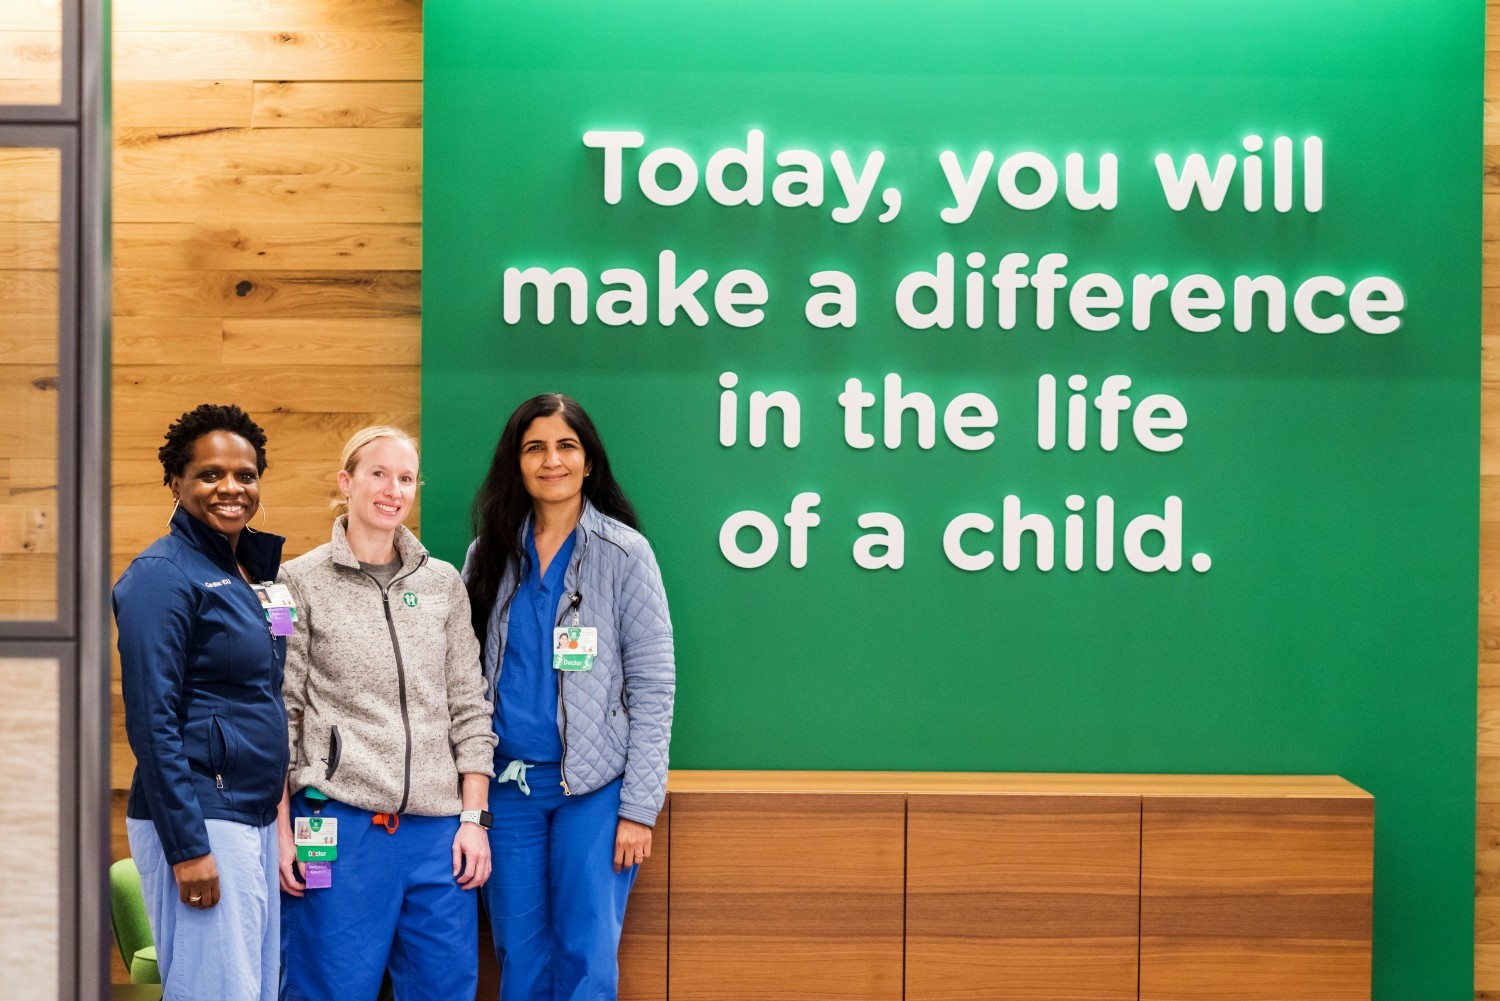 Our Mission-driven employees feel called to make a difference in the lives of the patients and families we serve.